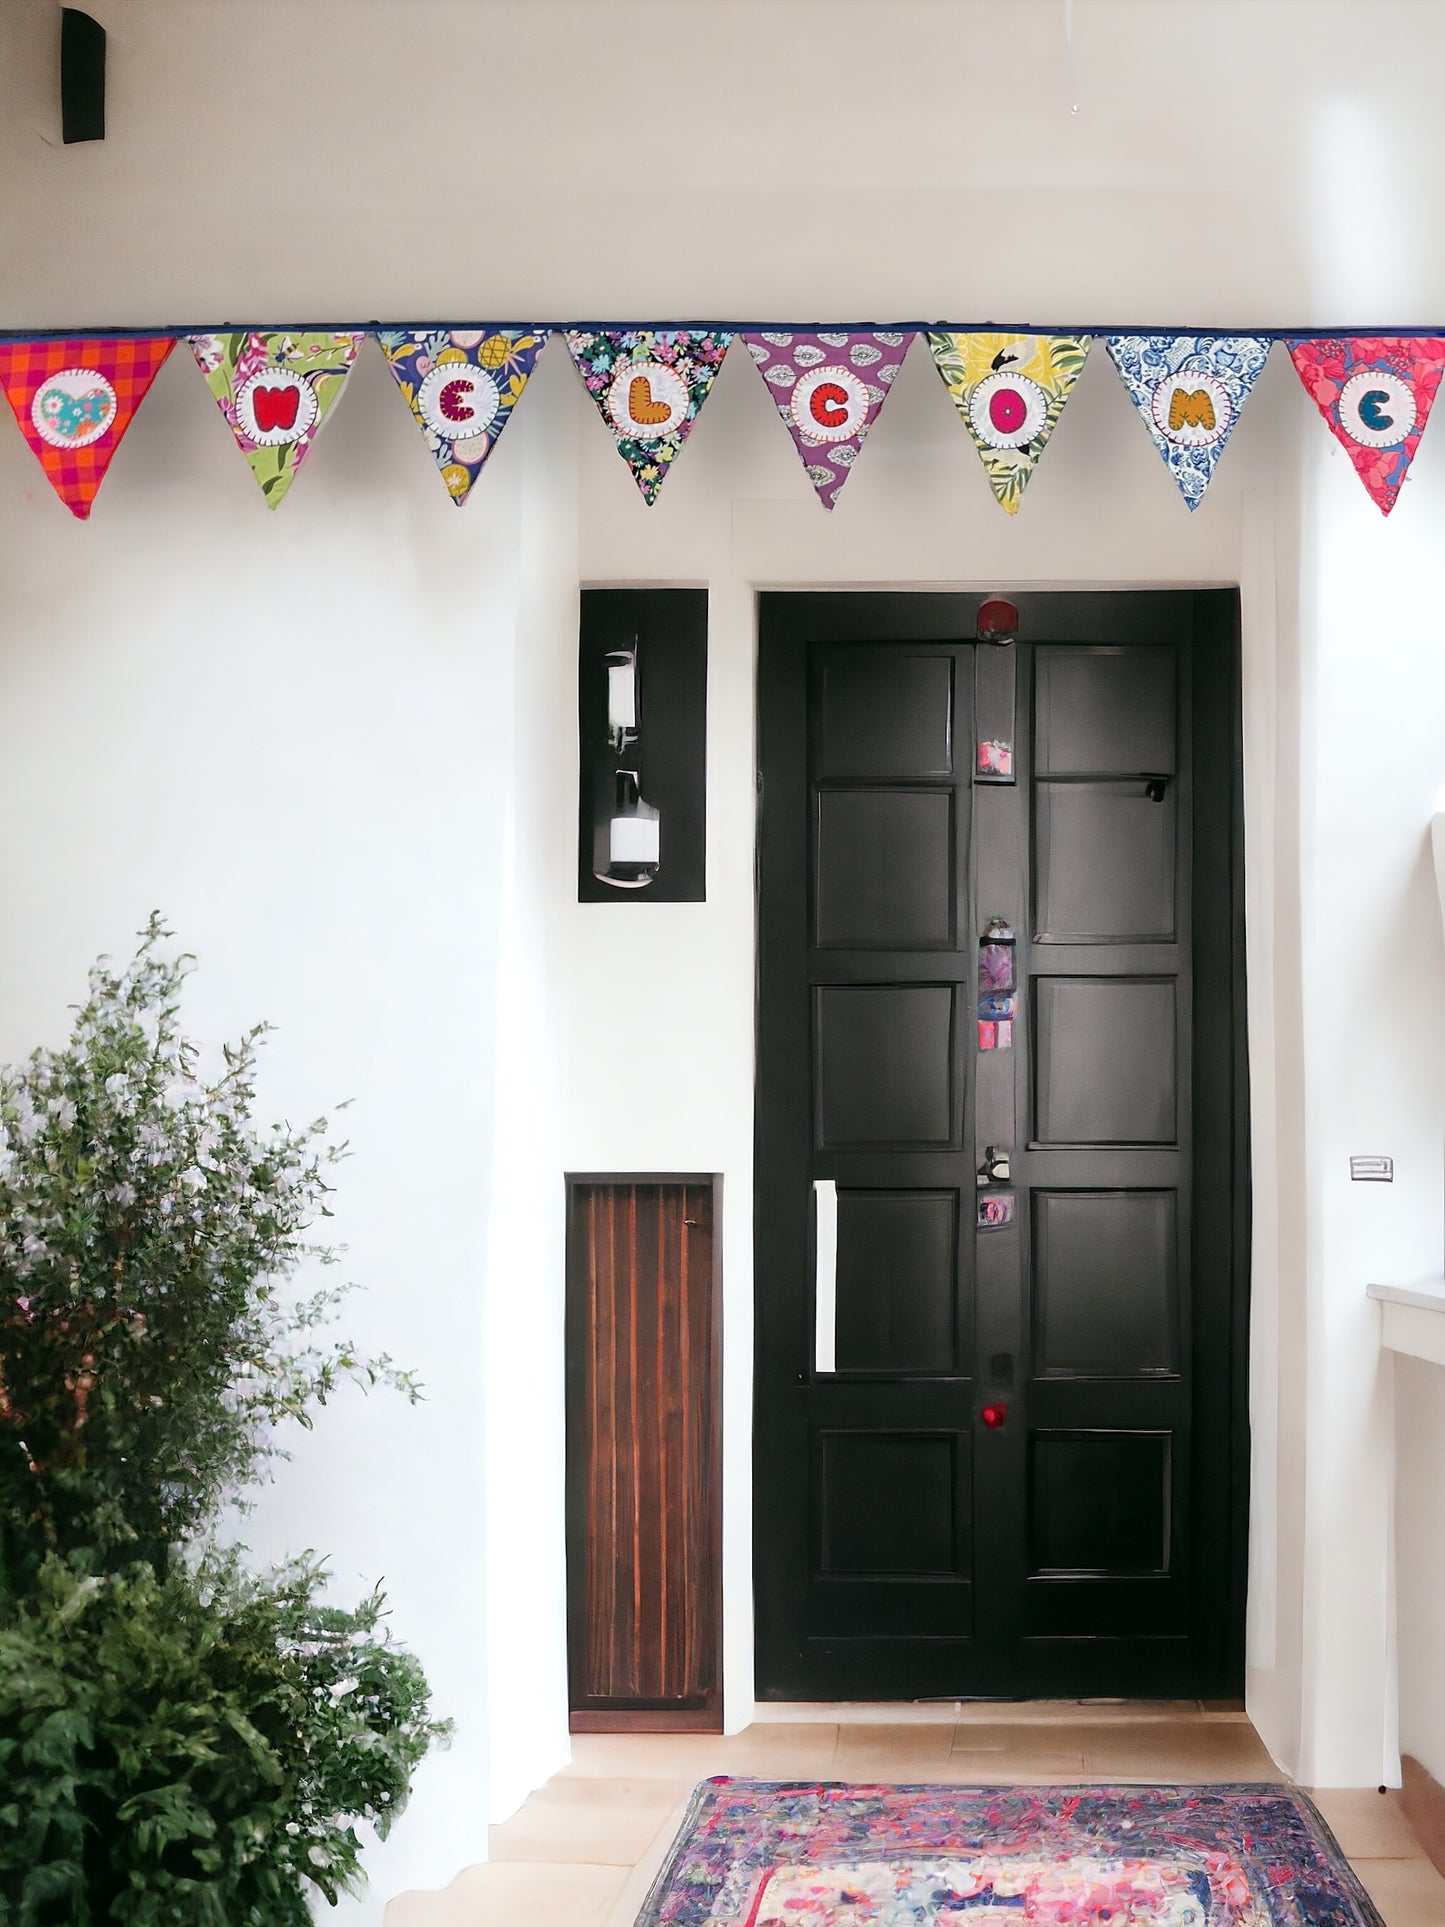 "Welcome" Upcycled Fabric Bunting